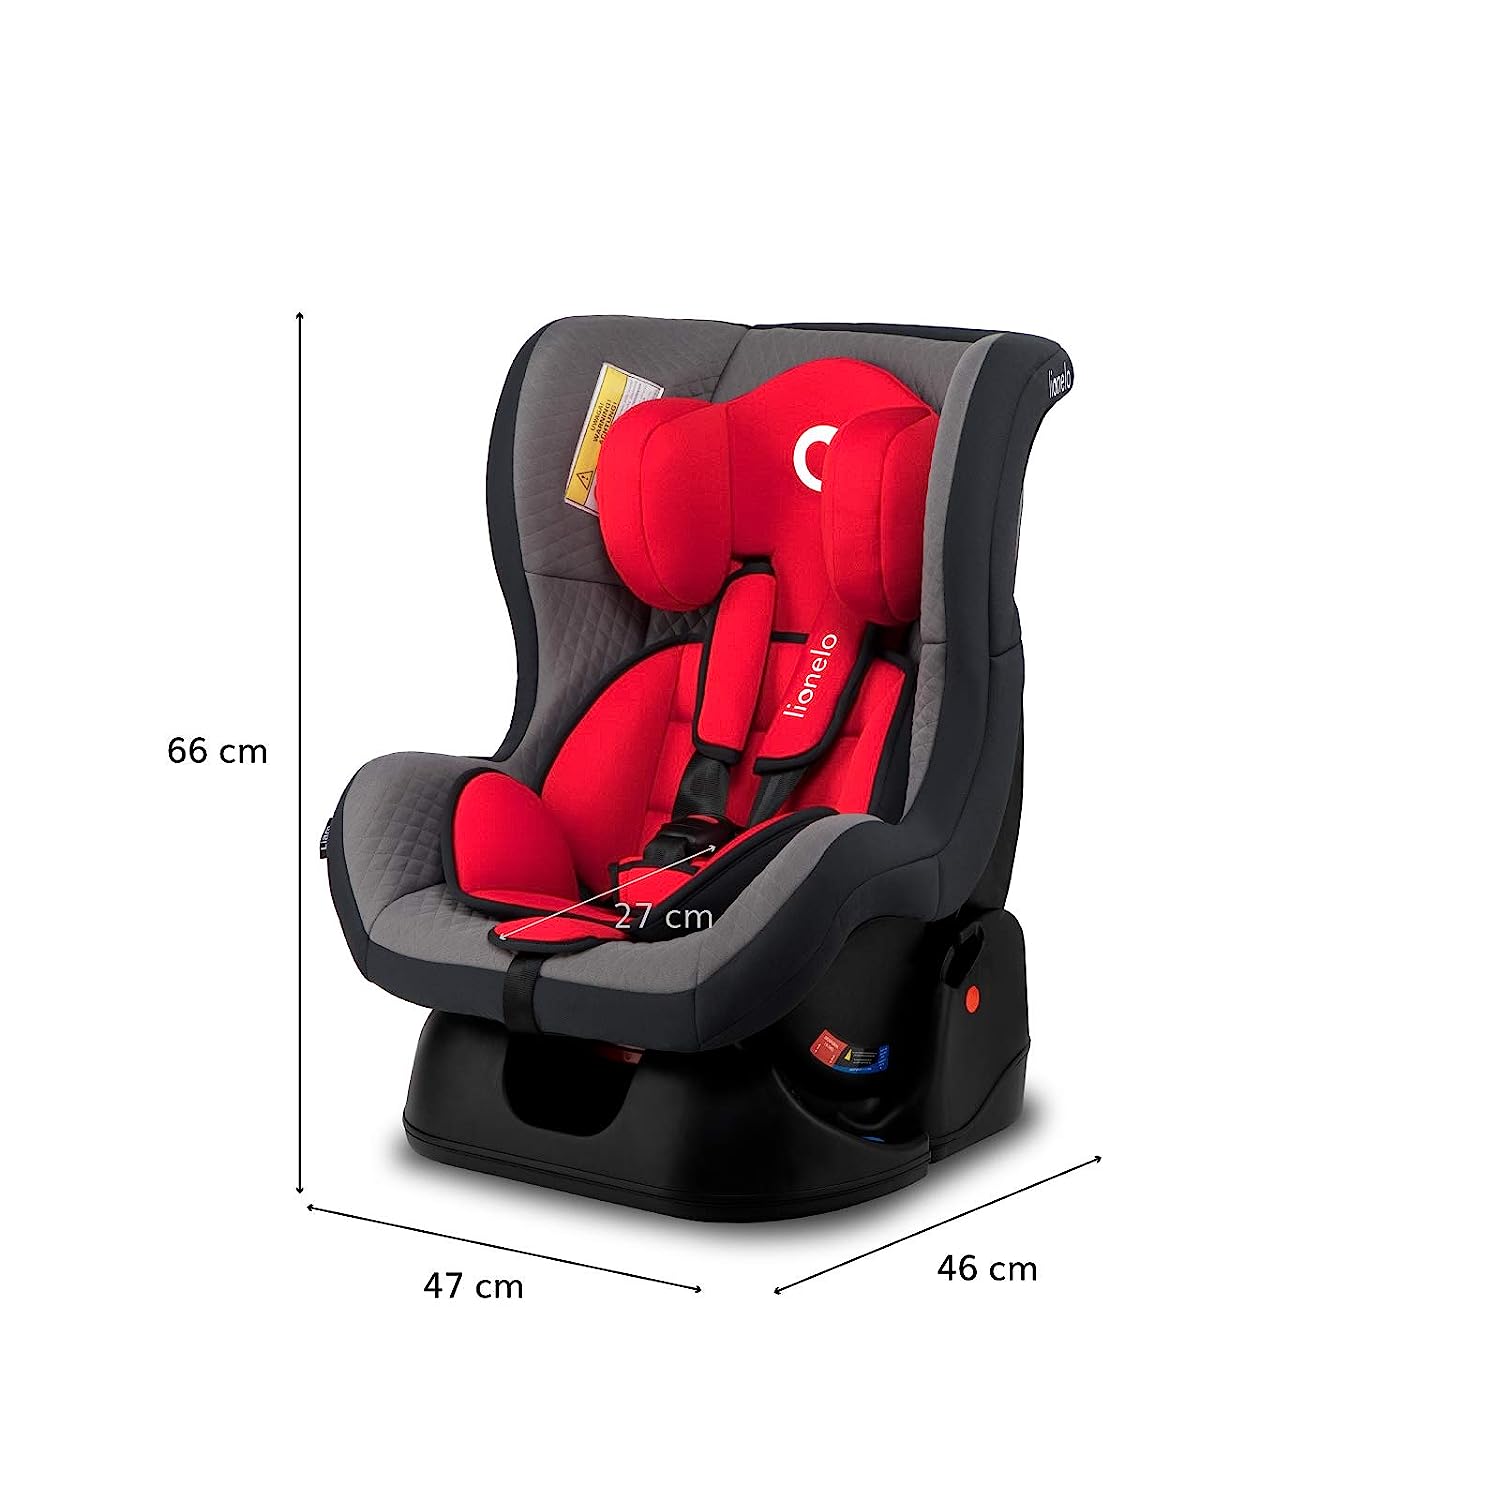 Lionelo Liam Plus Child Seat from Birth 0 to 18 kg Car Seat Group 0 1 to and against the direction of travel adjustment of the backrest 5 point seat belts ECE R44 04.